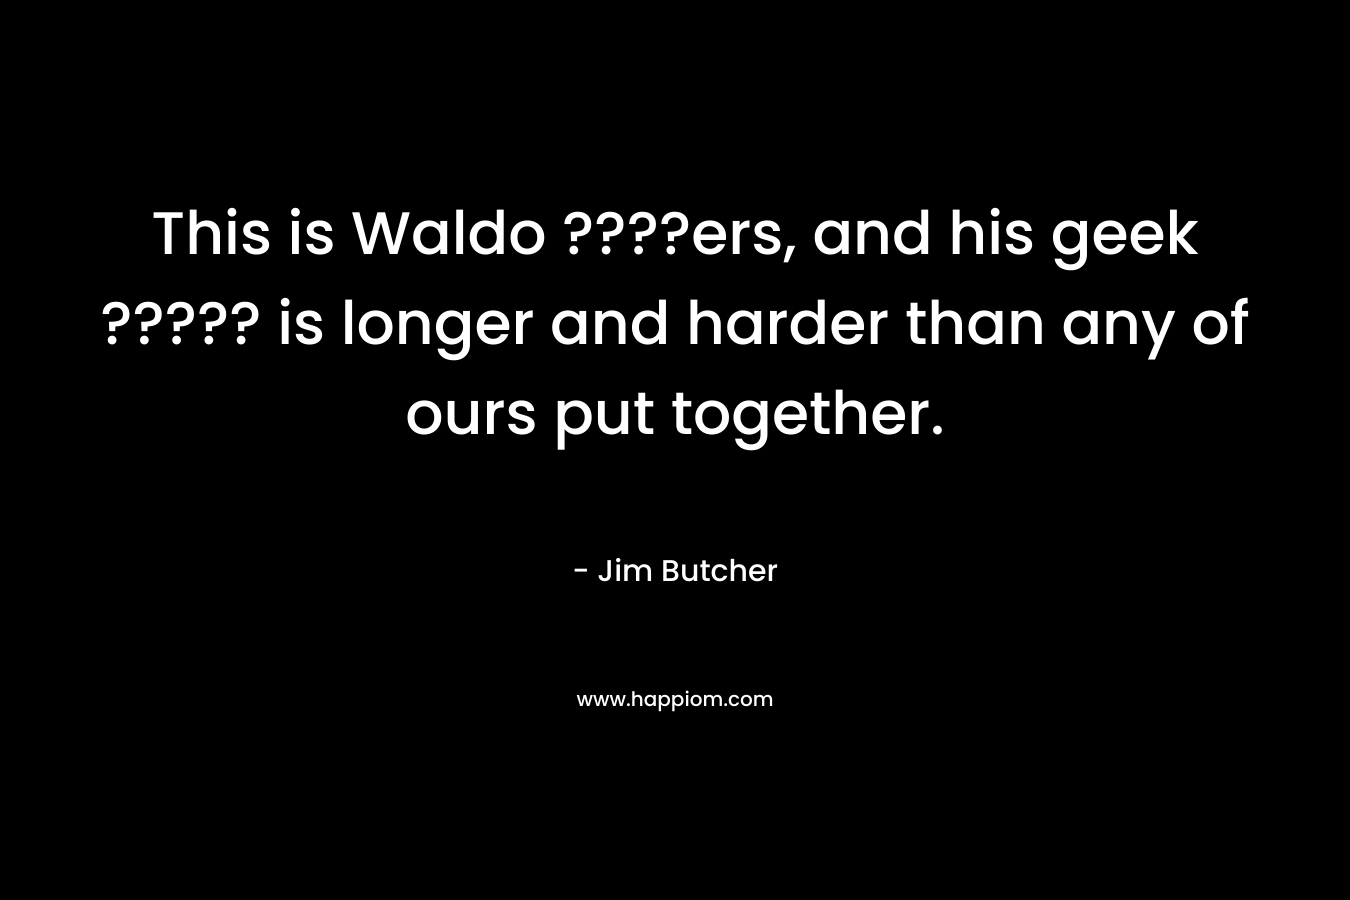 This is Waldo ????ers, and his geek ????? is longer and harder than any of ours put together. – Jim Butcher